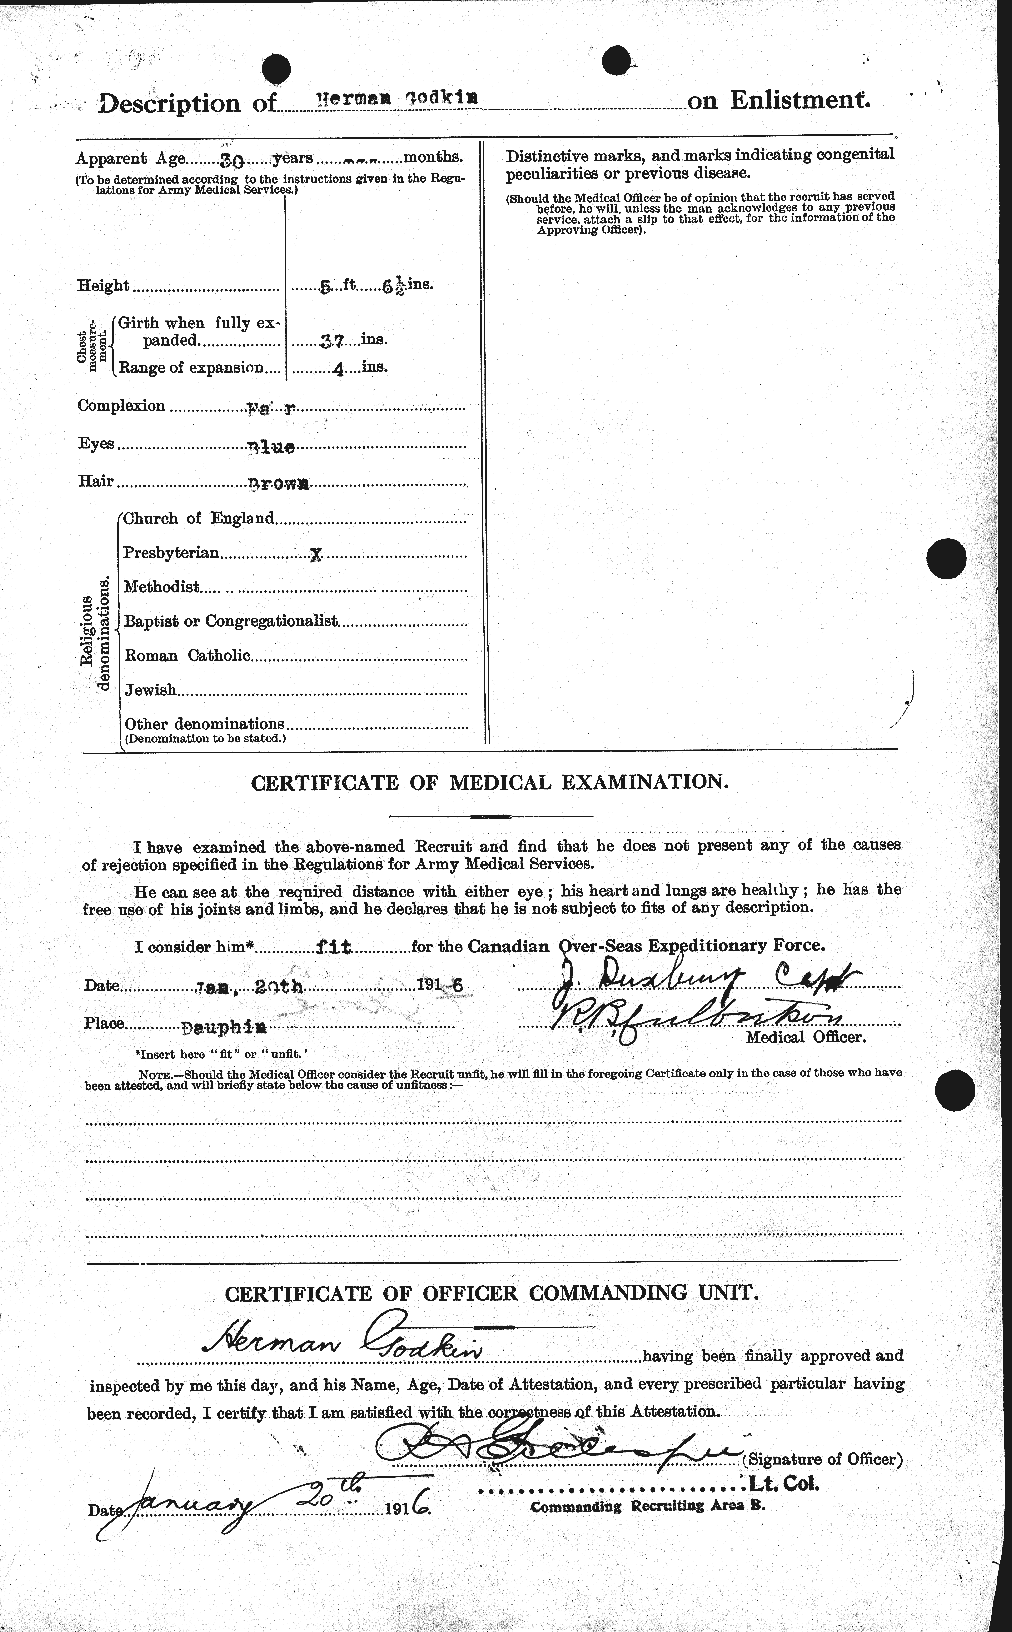 Personnel Records of the First World War - CEF 354590b